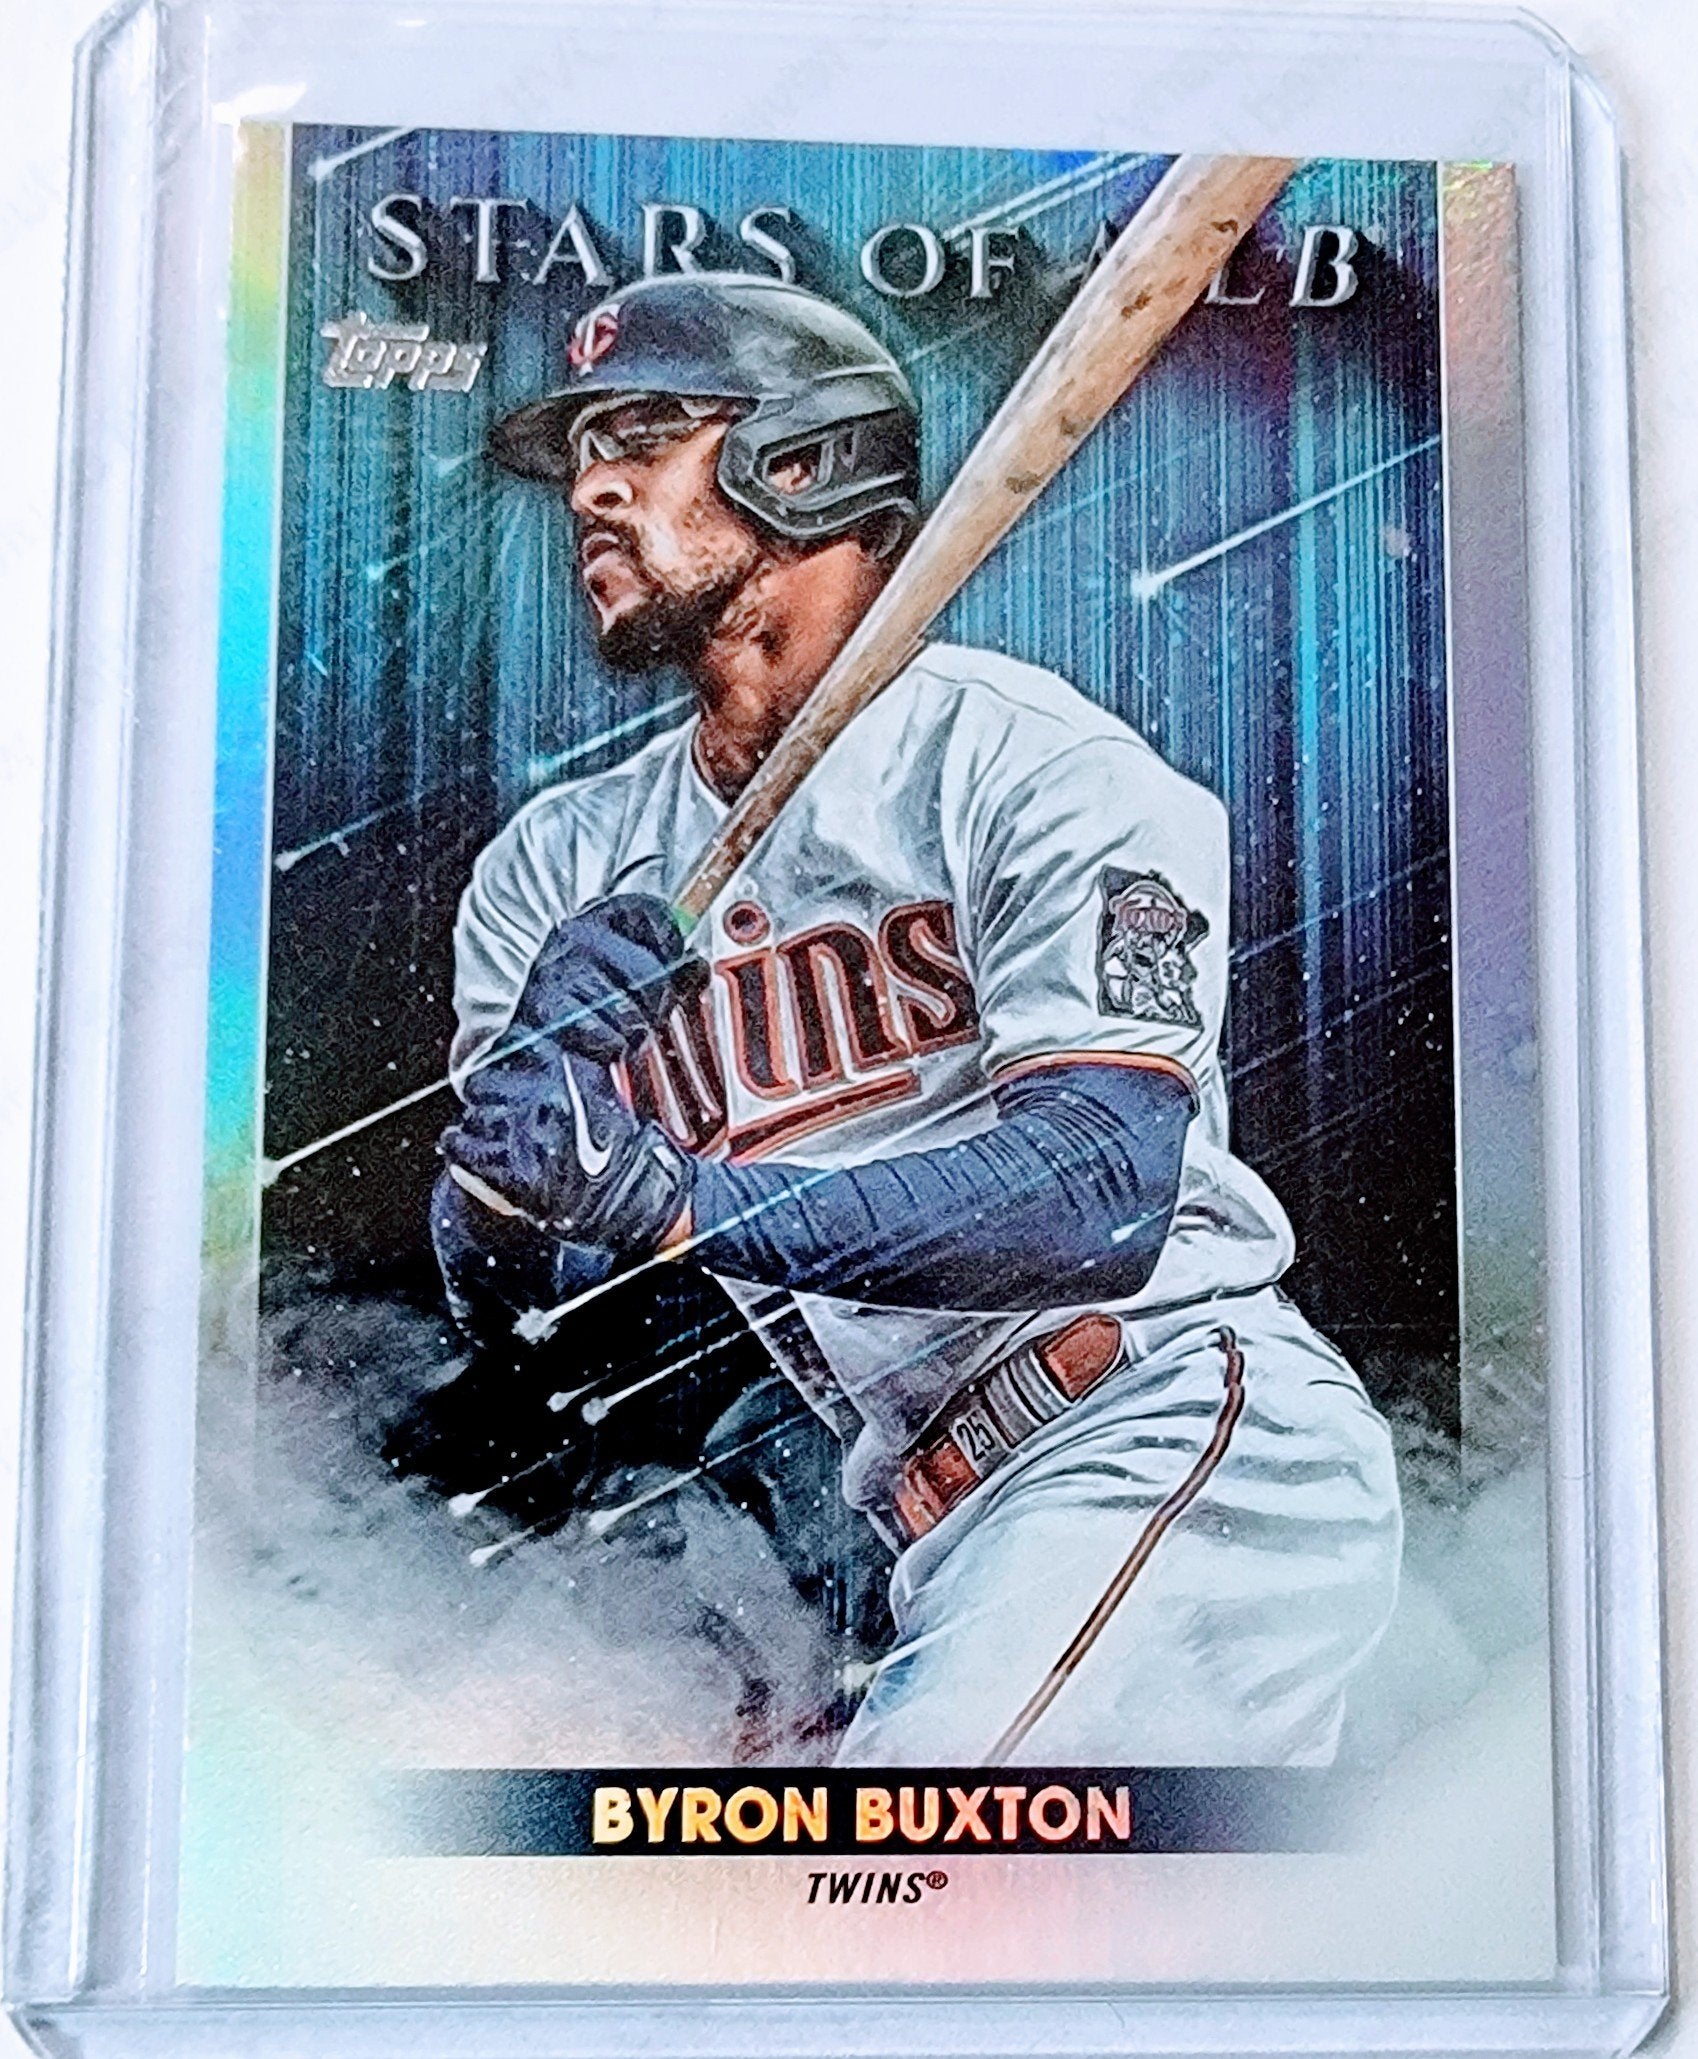 2022 Topps Byron Buxton Stars of the MLB Baseball Trading Card GRB1 simple Xclusive Collectibles   